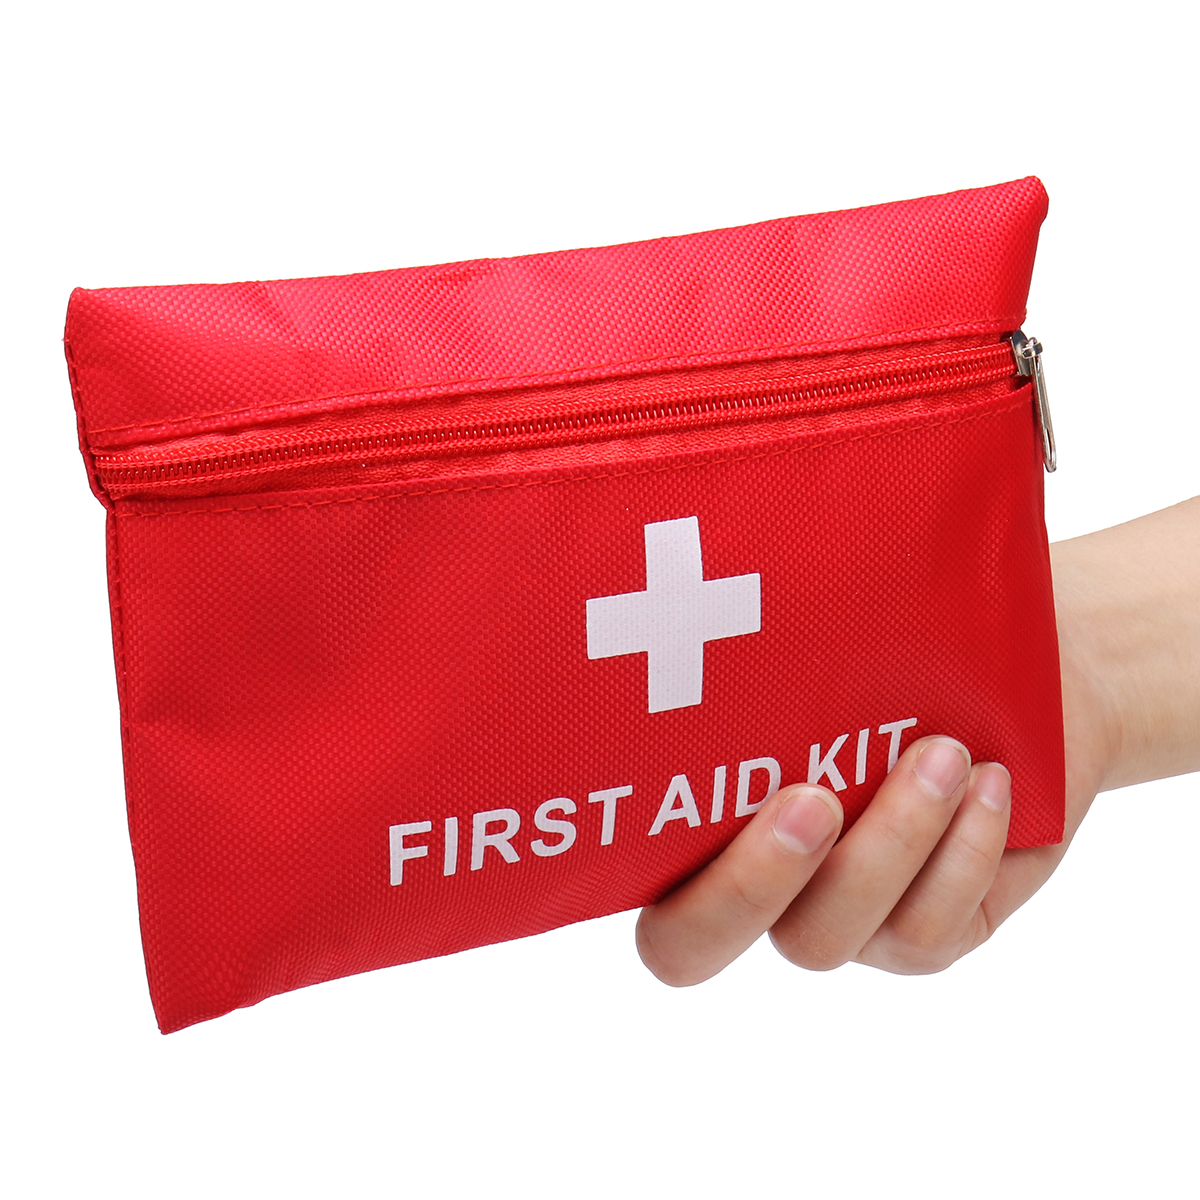 Emergency-First-Aid-Kit-39-Piece-Survival-Supplies-Bag-for-Car-Travel-Home-Emergency-Box-1420492-5